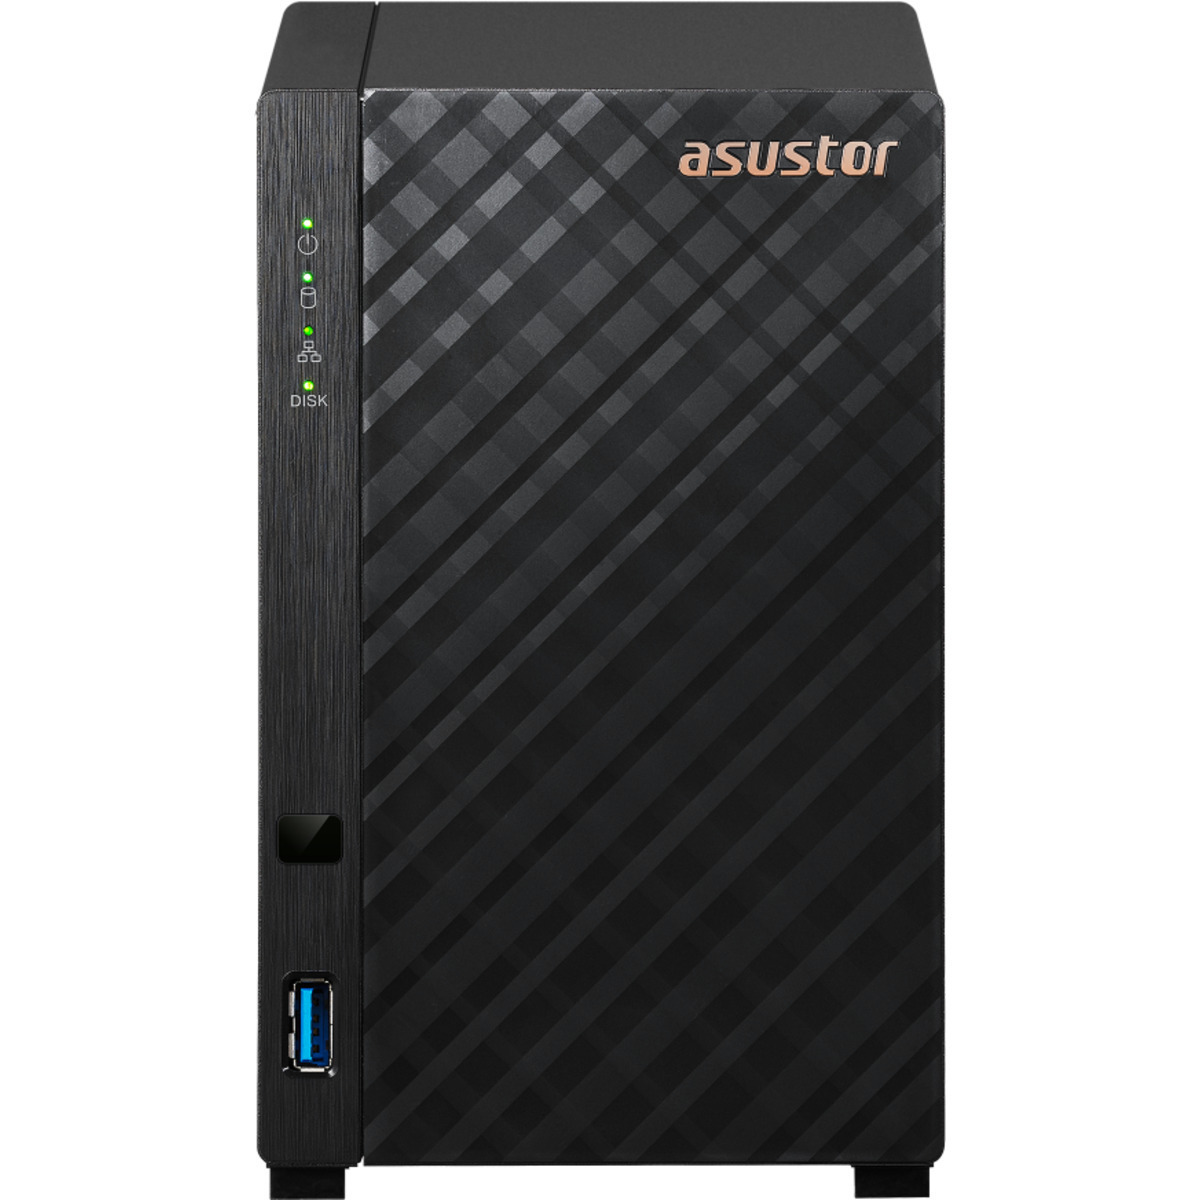 buy $928 ASUSTOR DRIVESTOR 2 AS1102T 40tb Desktop NAS - Network Attached Storage Device 2x20000gb Seagate EXOS X20 ST20000NM007D 3.5 7200rpm SATA 6Gb/s HDD ENTERPRISE Class Drives Installed - Burn-In Tested - nas headquarters buy network attached storage server device das new raid-5 free shipping usa DRIVESTOR 2 AS1102T